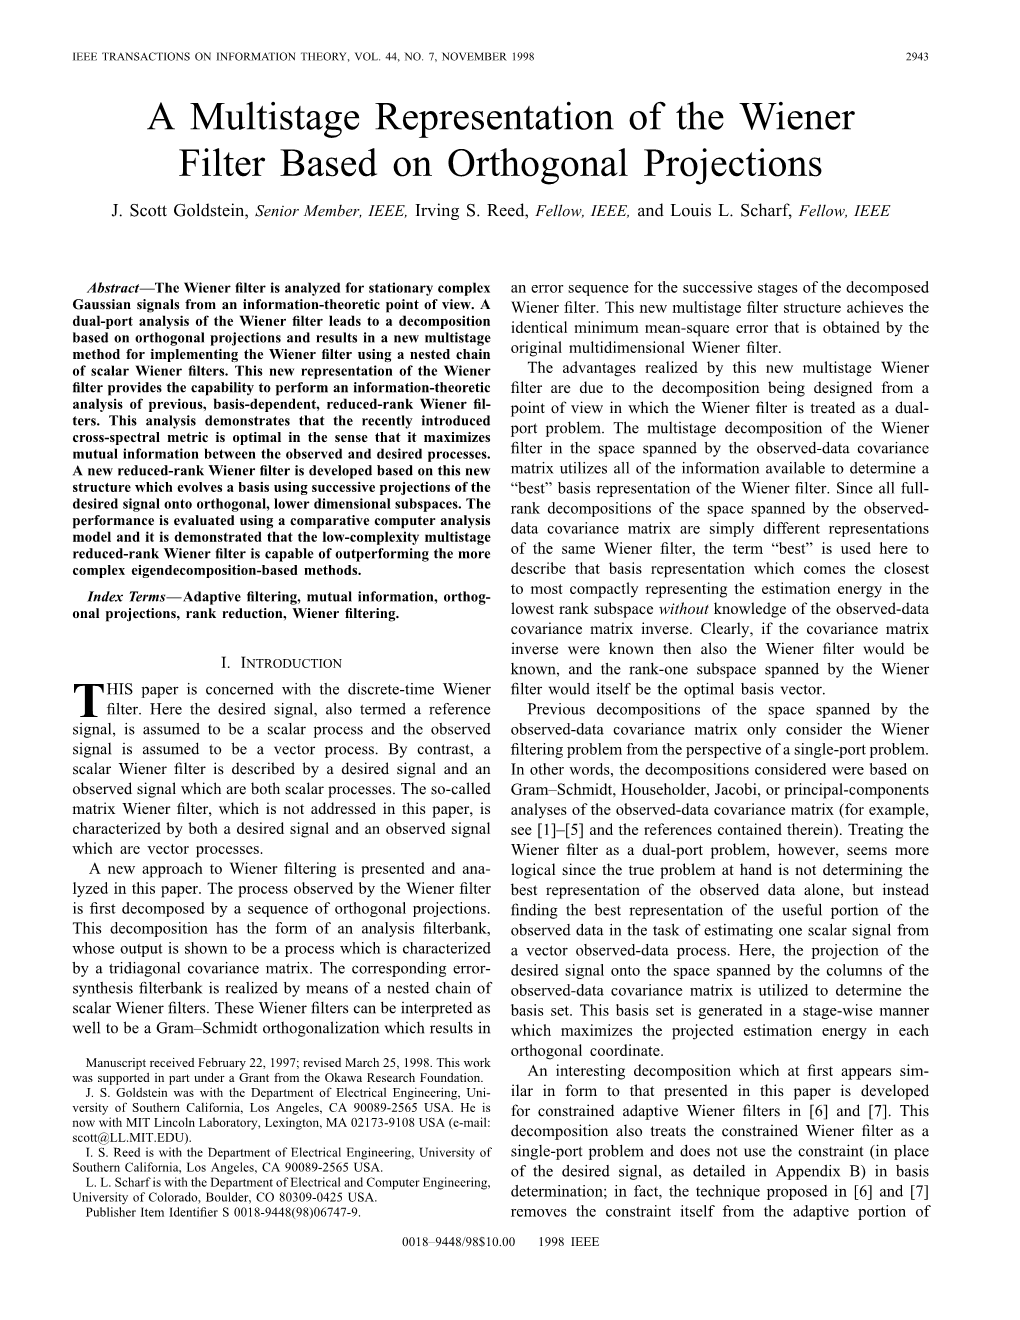 A Multistage Representation of the Wiener Filter Based on Orthogonal Projections